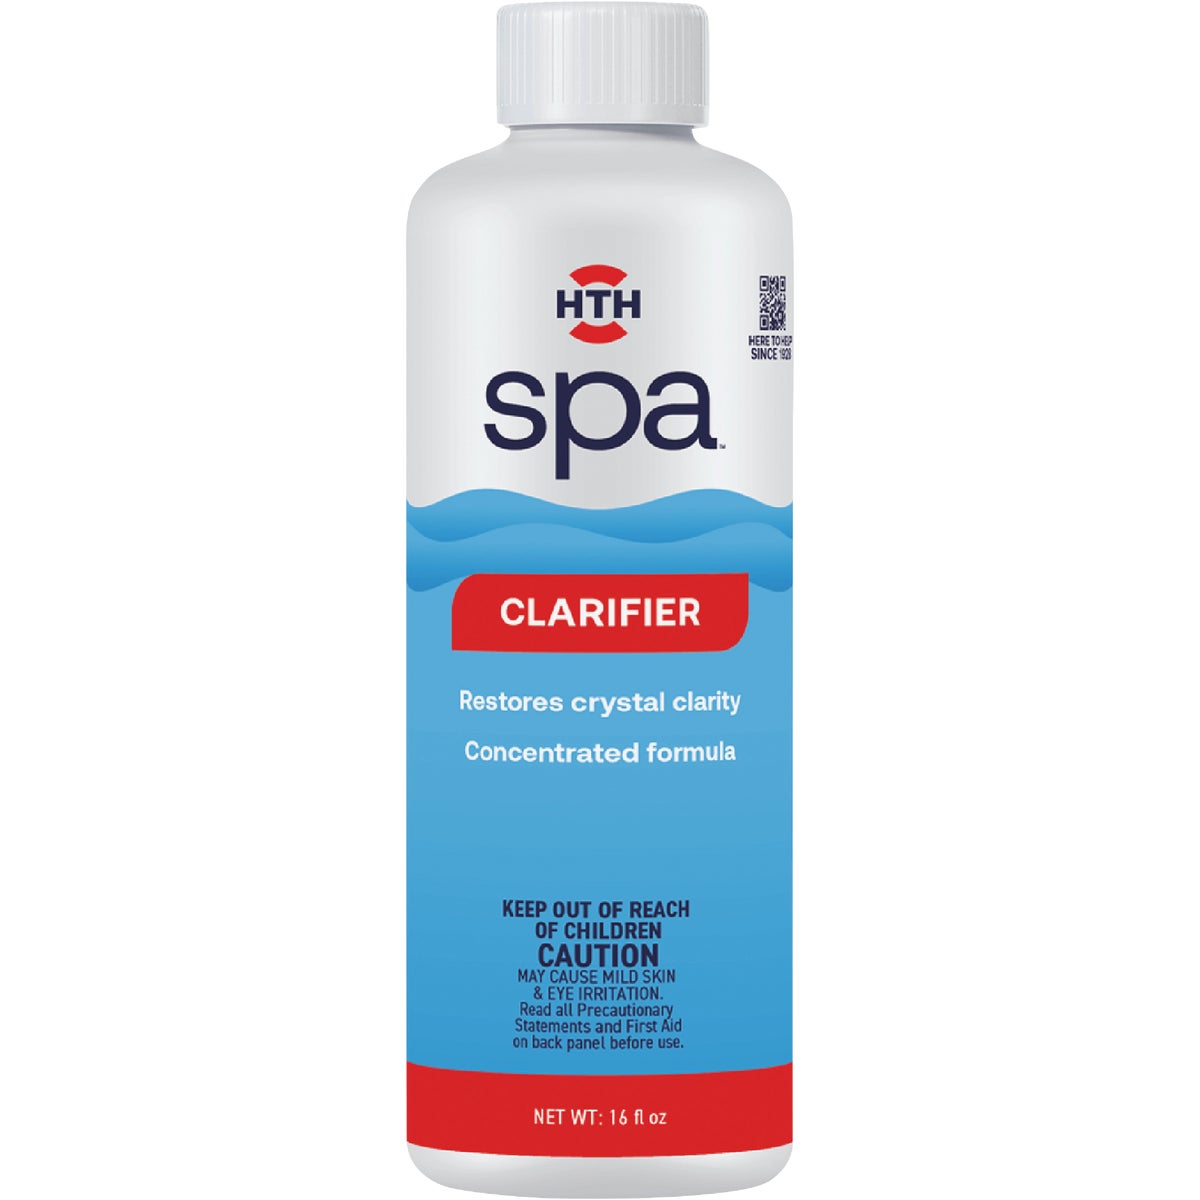 Item 810576, Spa liquid clarifier is a powerful, concentrated formula that helps you 